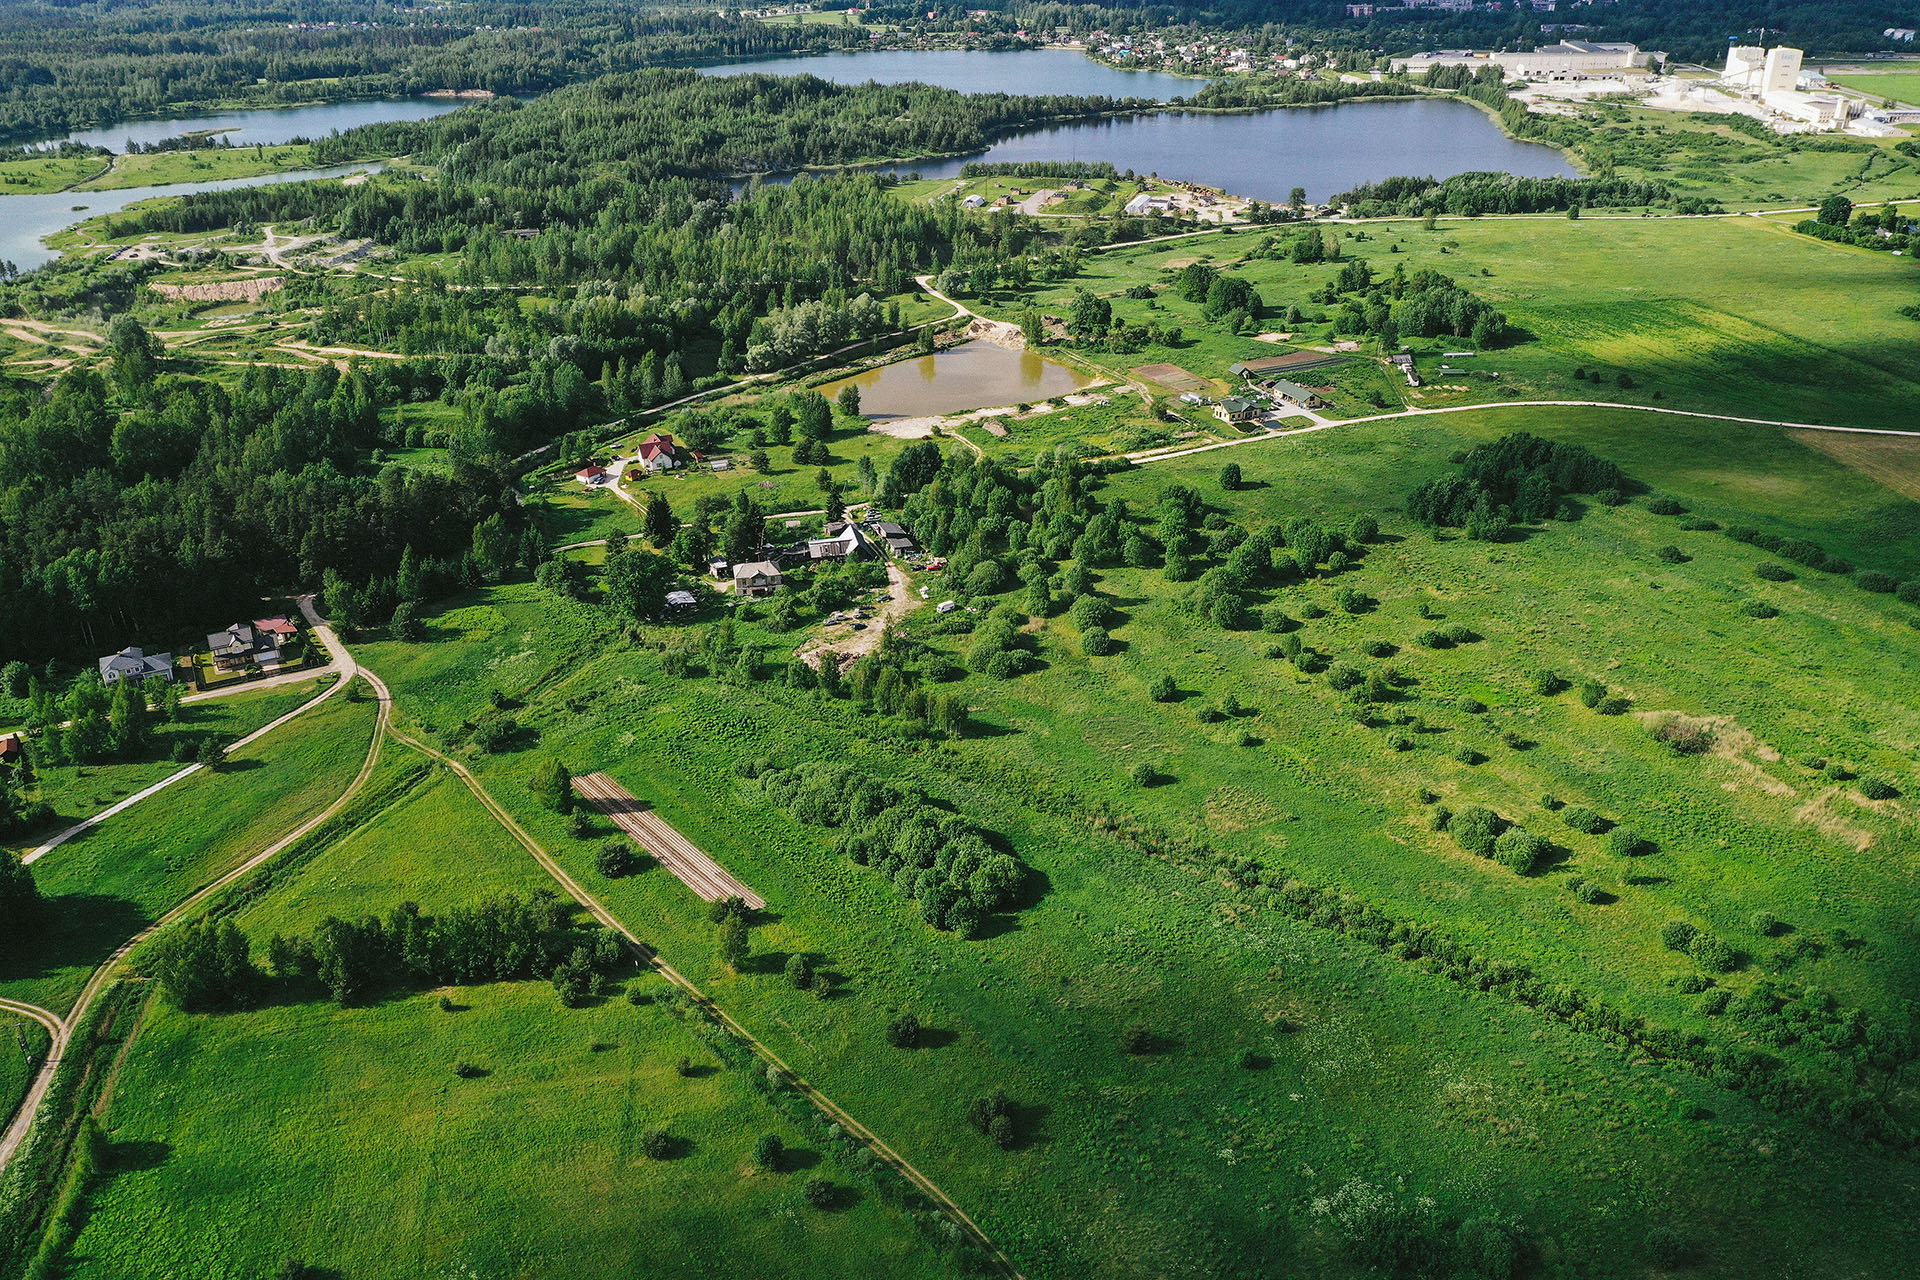 aerial view of a rural landscape